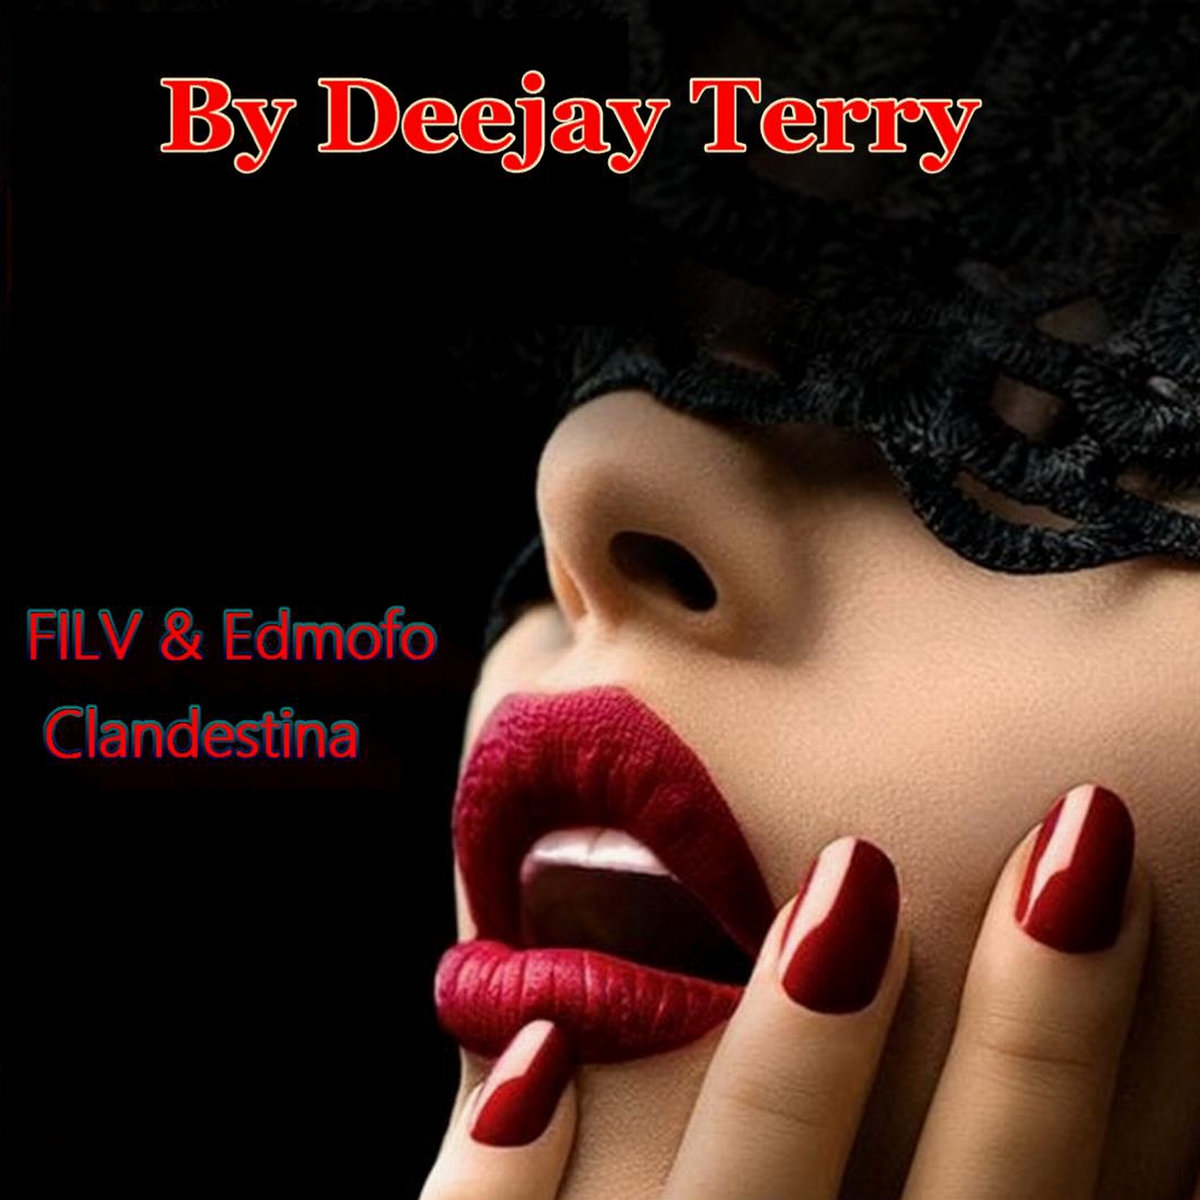 Clandestina (By Deejay Terry) | Deejay Terry